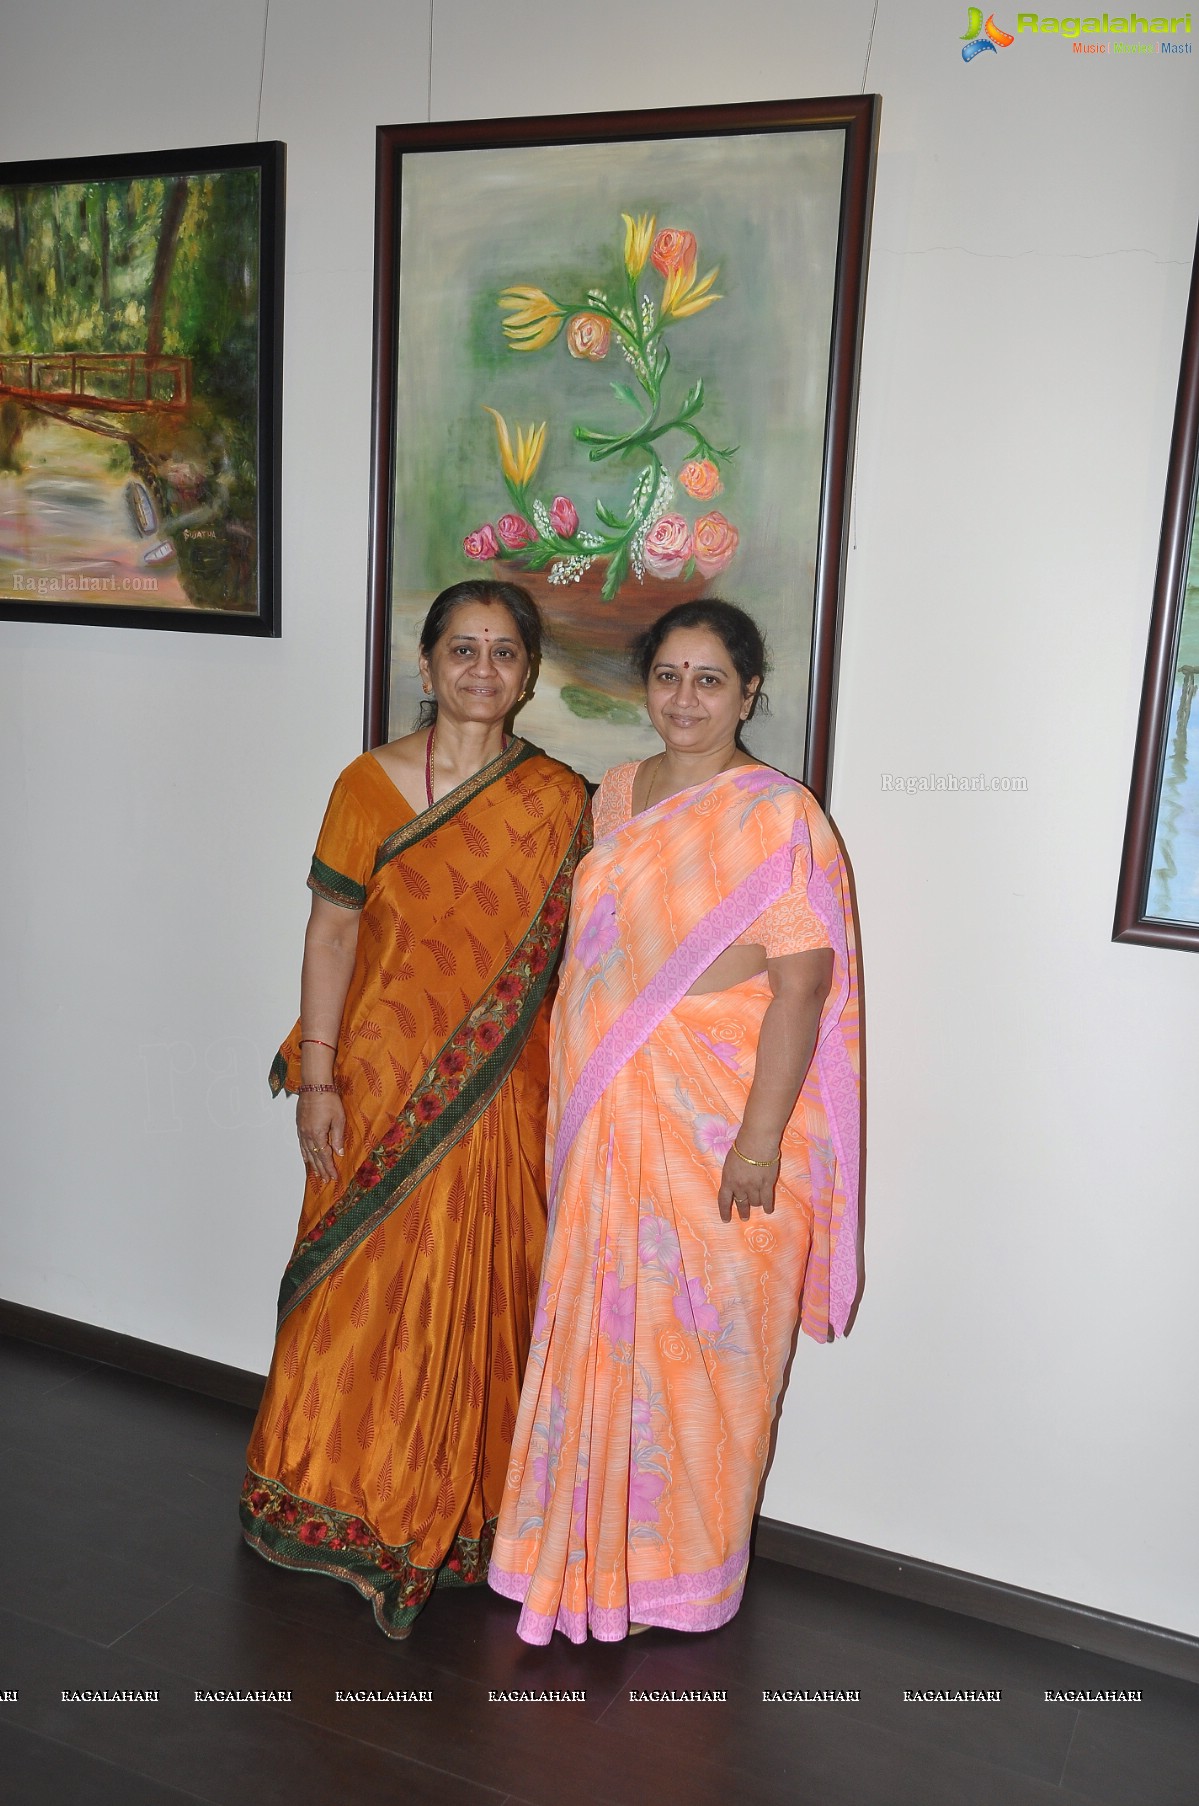 Strokes - A Brush with Nature; T Sujatha's Art Exhibition at Poecile Art Gallery, Hyderabad